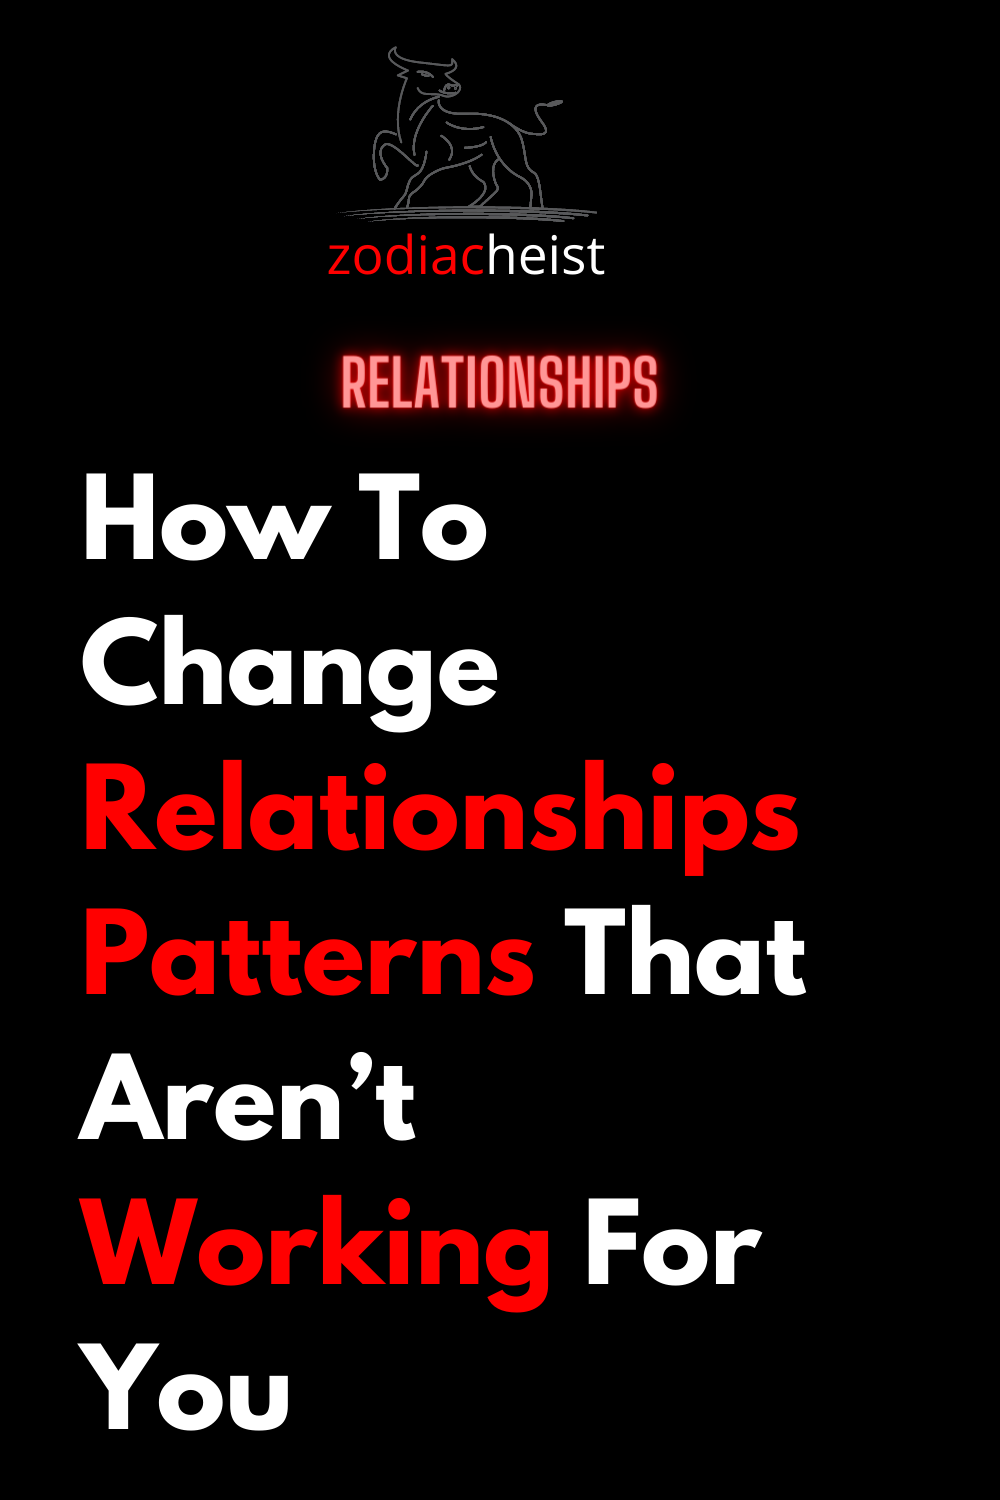 How To Change Relationships Patterns That Aren’t Working For You